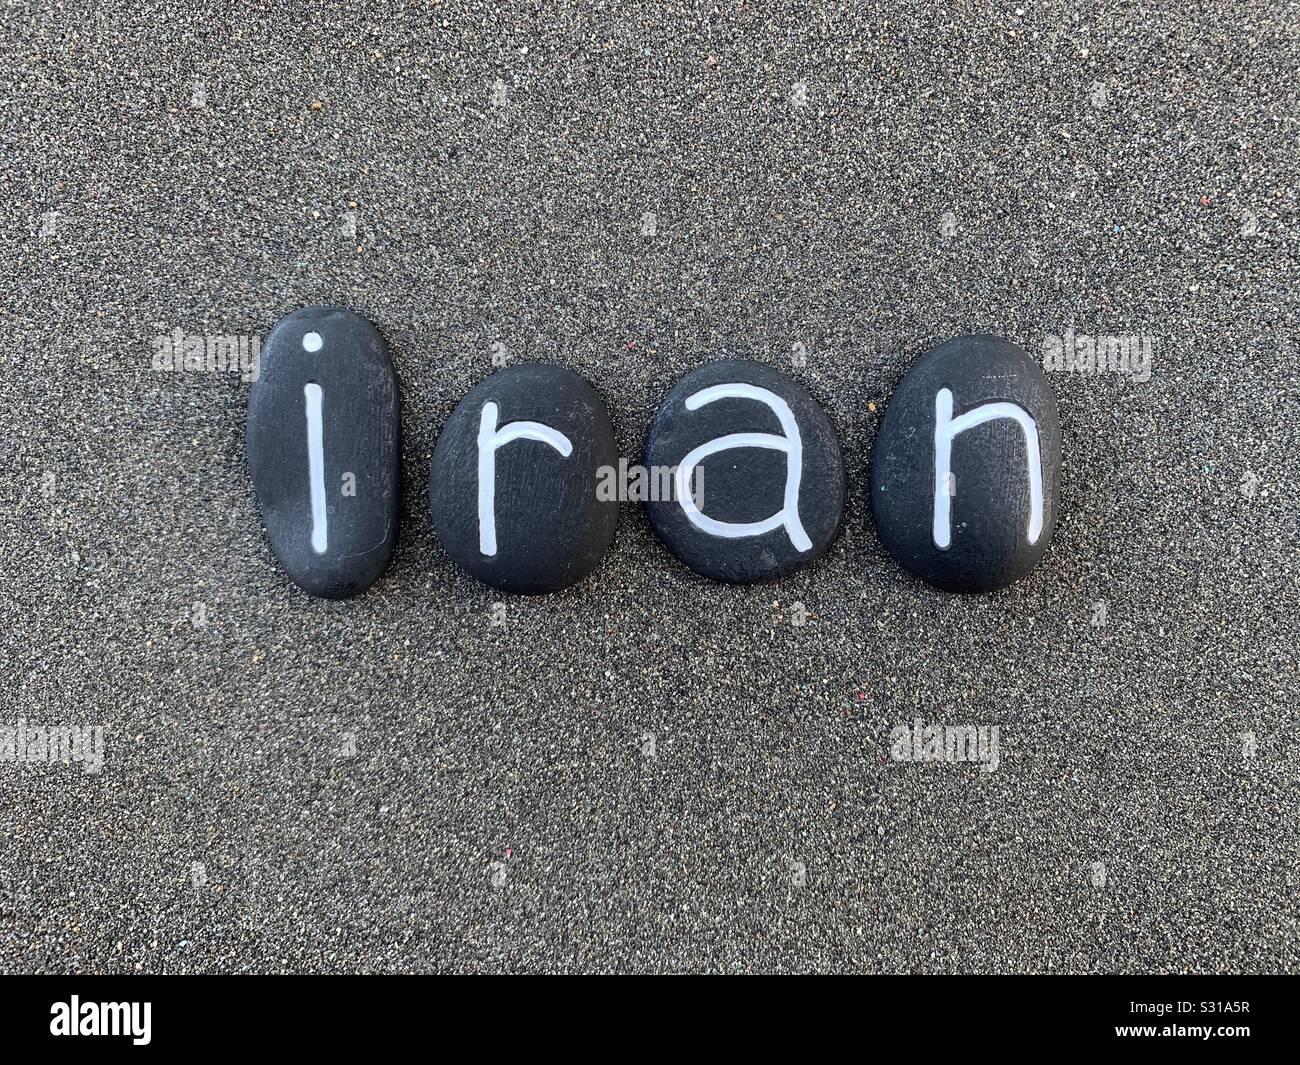 Iran, Islamic Republic of Iran, souvenir with composed with black colored stone letters over black volcanic sand Stock Photo